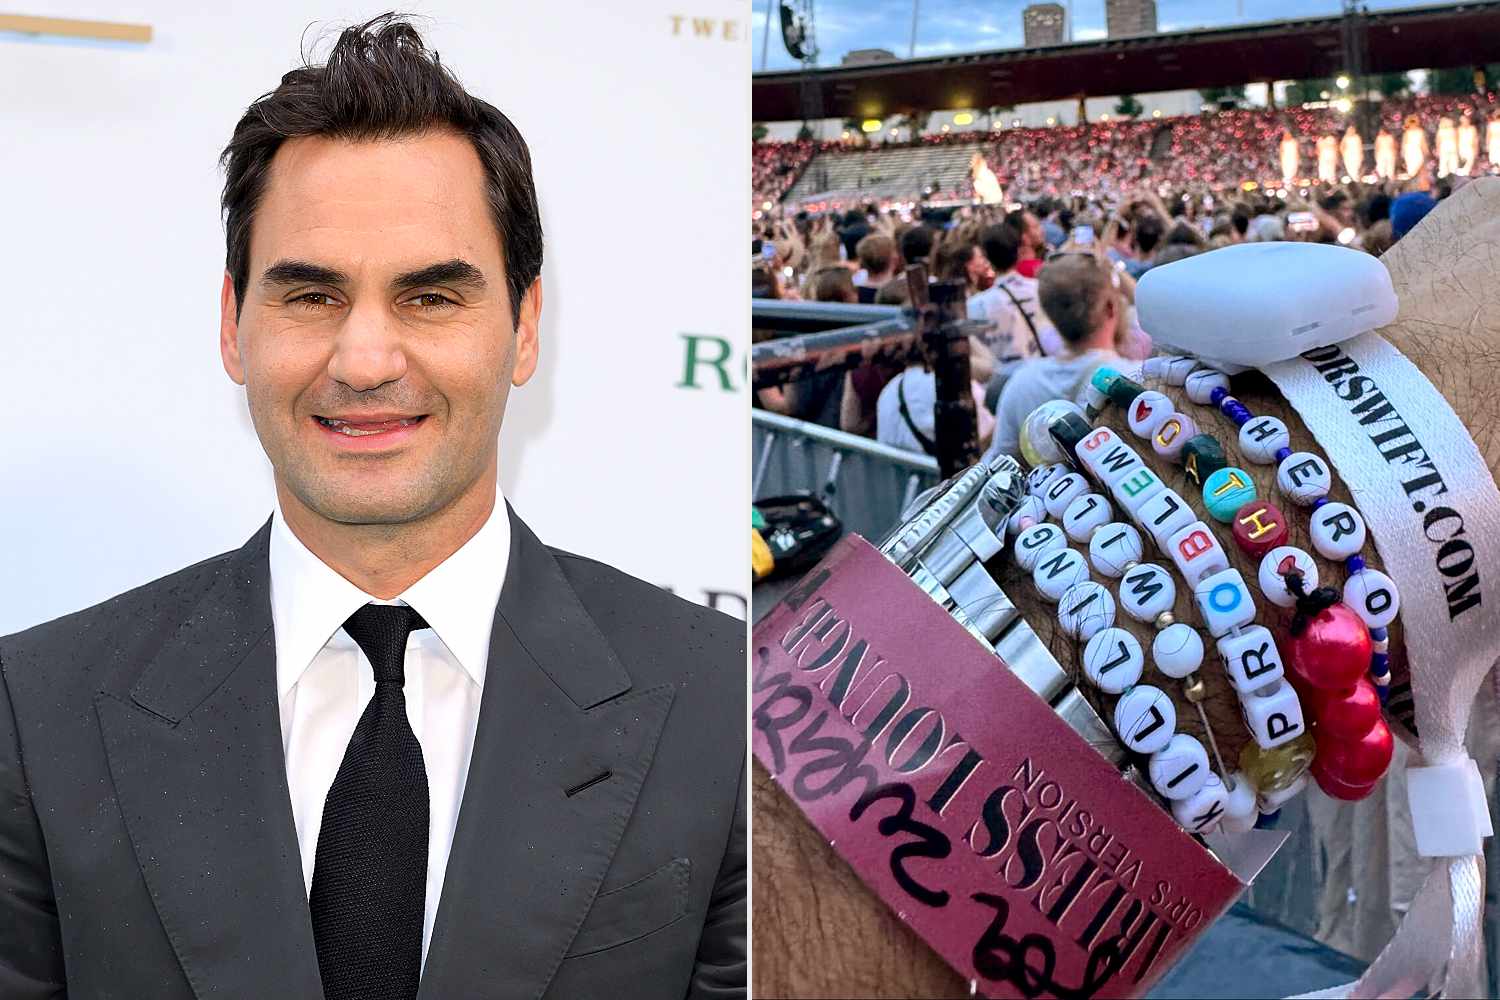 Roger Federer Shows Off His Stack of Friendship Bracelets as He Enjoys Taylor Swift's Eras Tour with His Family